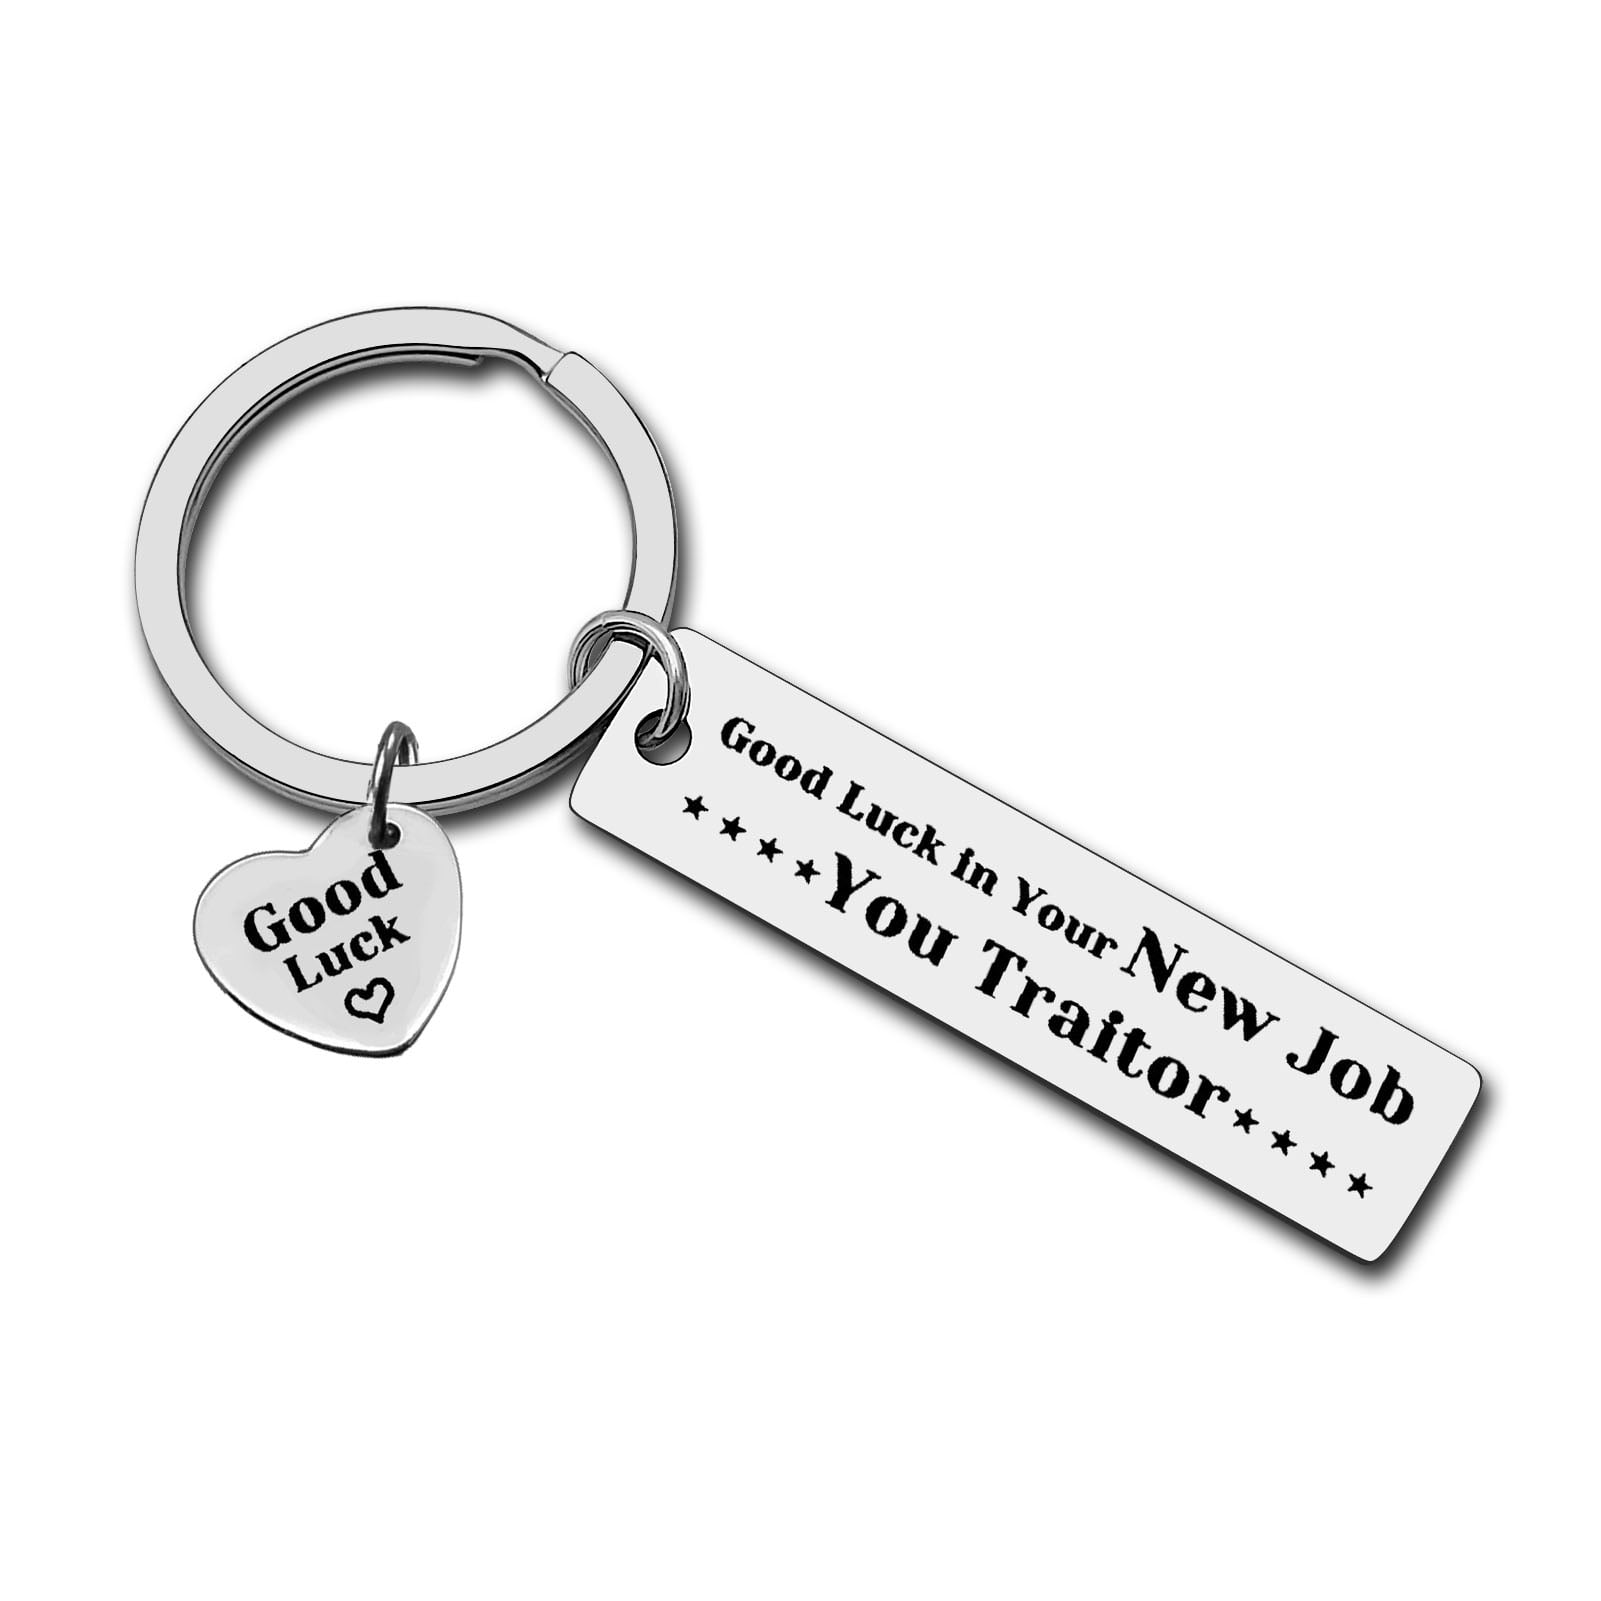 Coworker Goodbye Farewell Gift Coworker Going Away Gift Coworker Leaving Keychain Coworker Retirement Gift for Coworker Appreciation Gift Coworker Retiring Gift Coworker Keychain 